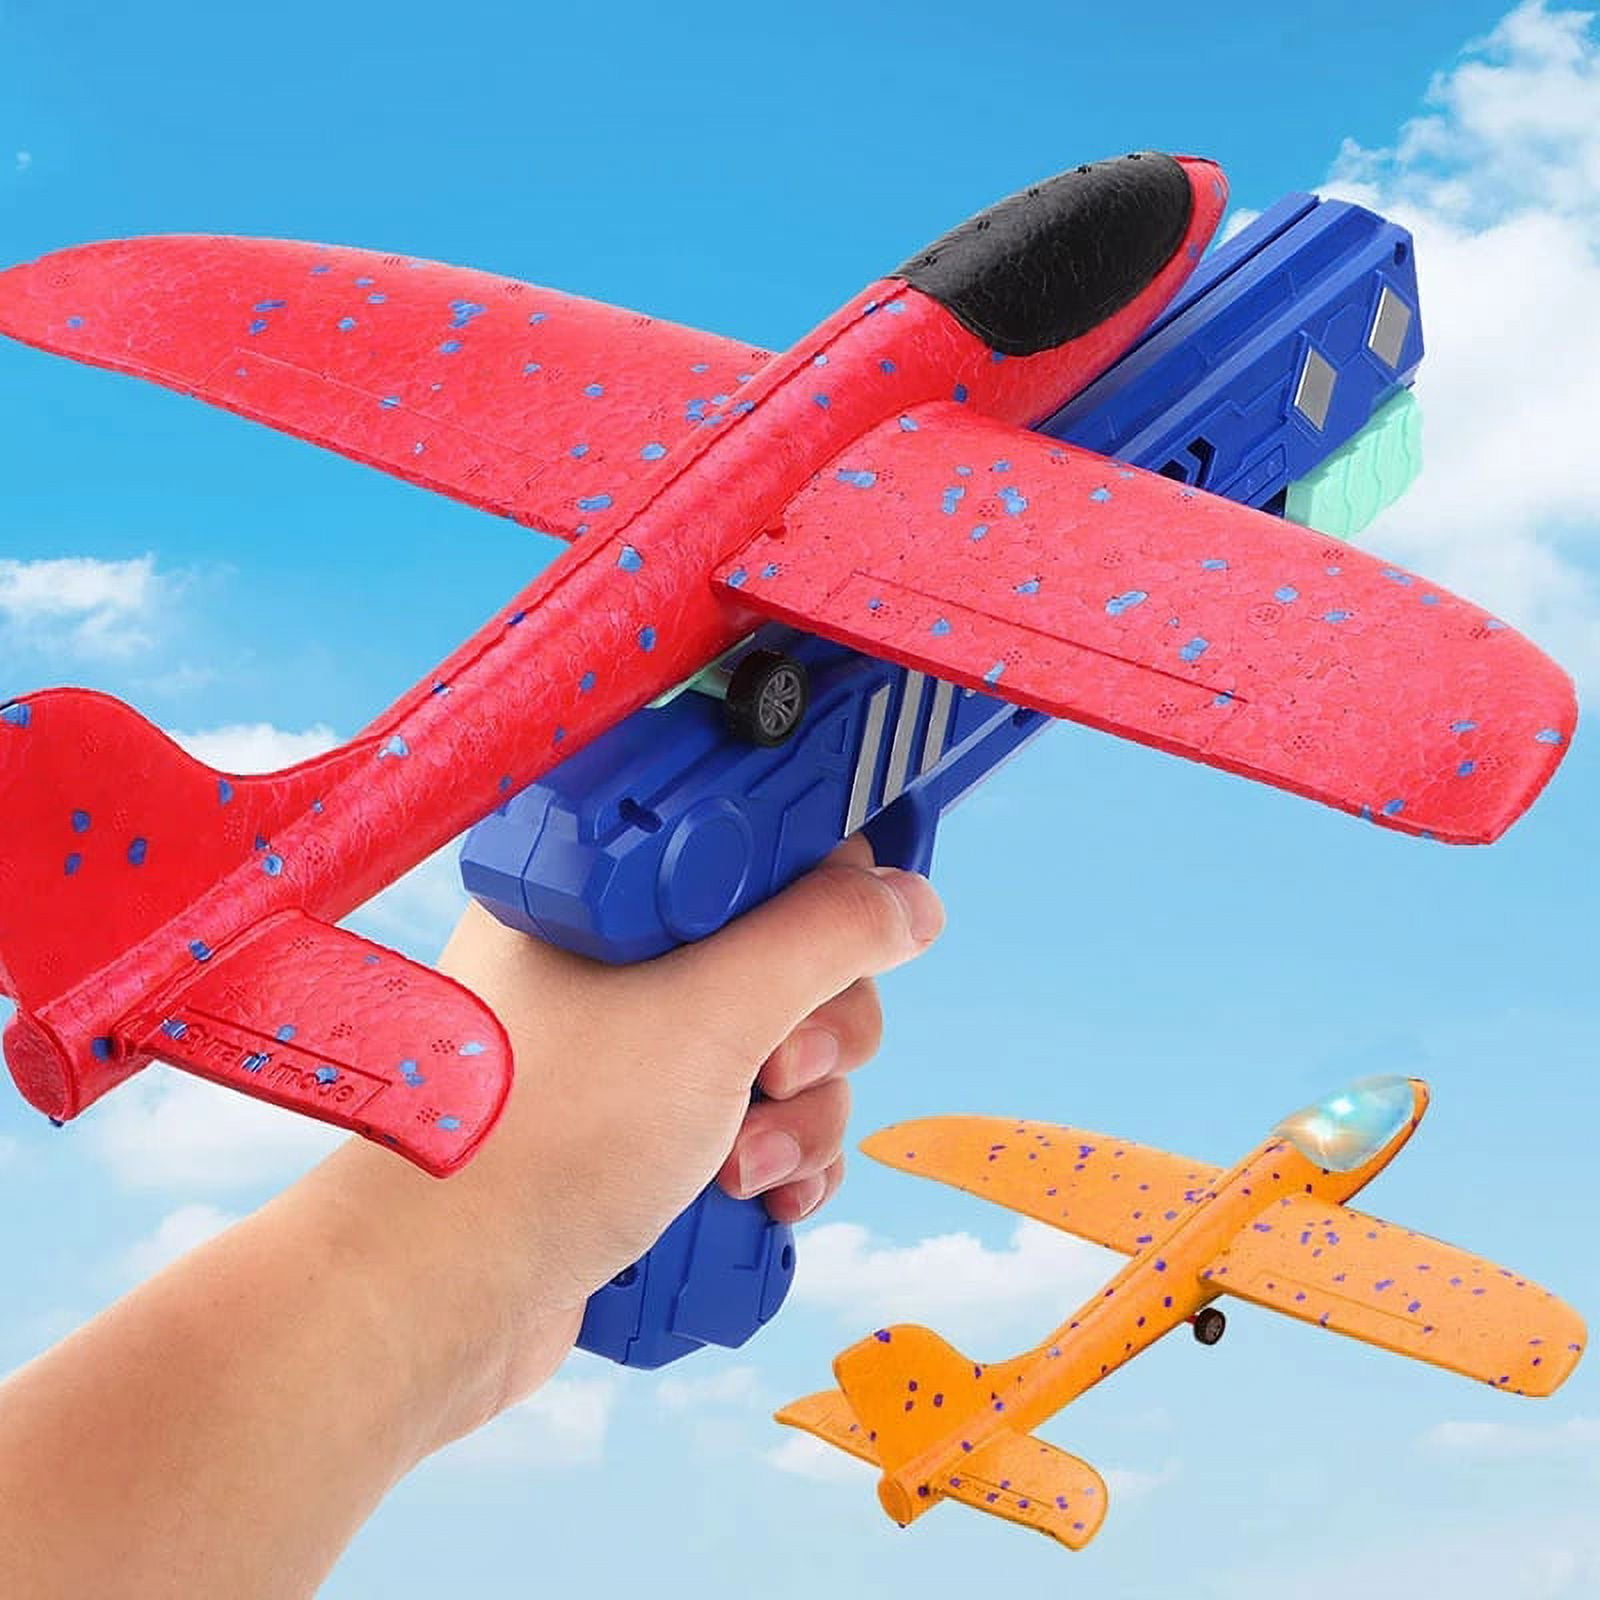 Foam Plane 10M Launcher Catapult Airplane Gun Toy Children Outdoor Game Bubble Model Shooting Fly Roundabout Toys